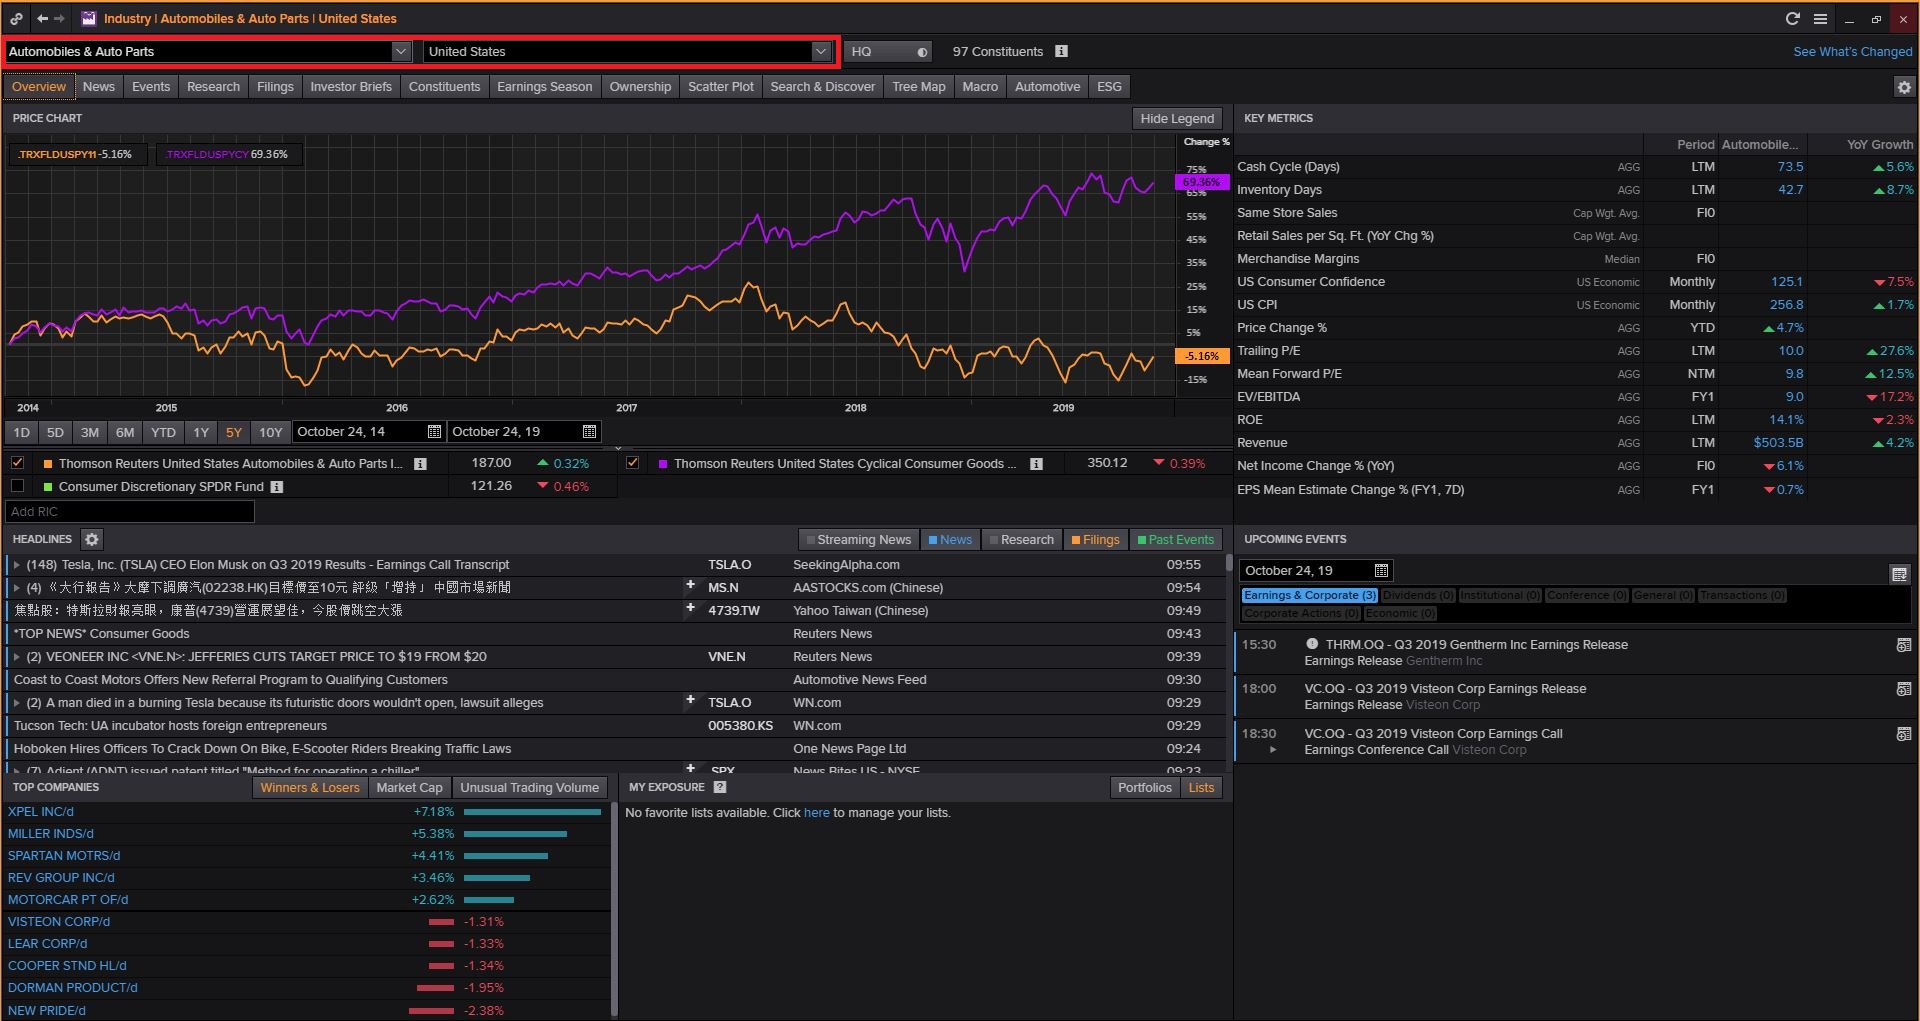 Login to Thomson Reuters Eikon (Available Only in Library) then Type INDUS and Search and Select Consumer Cyclicals and Click on Automobiles & Auto Parts and Select Country 